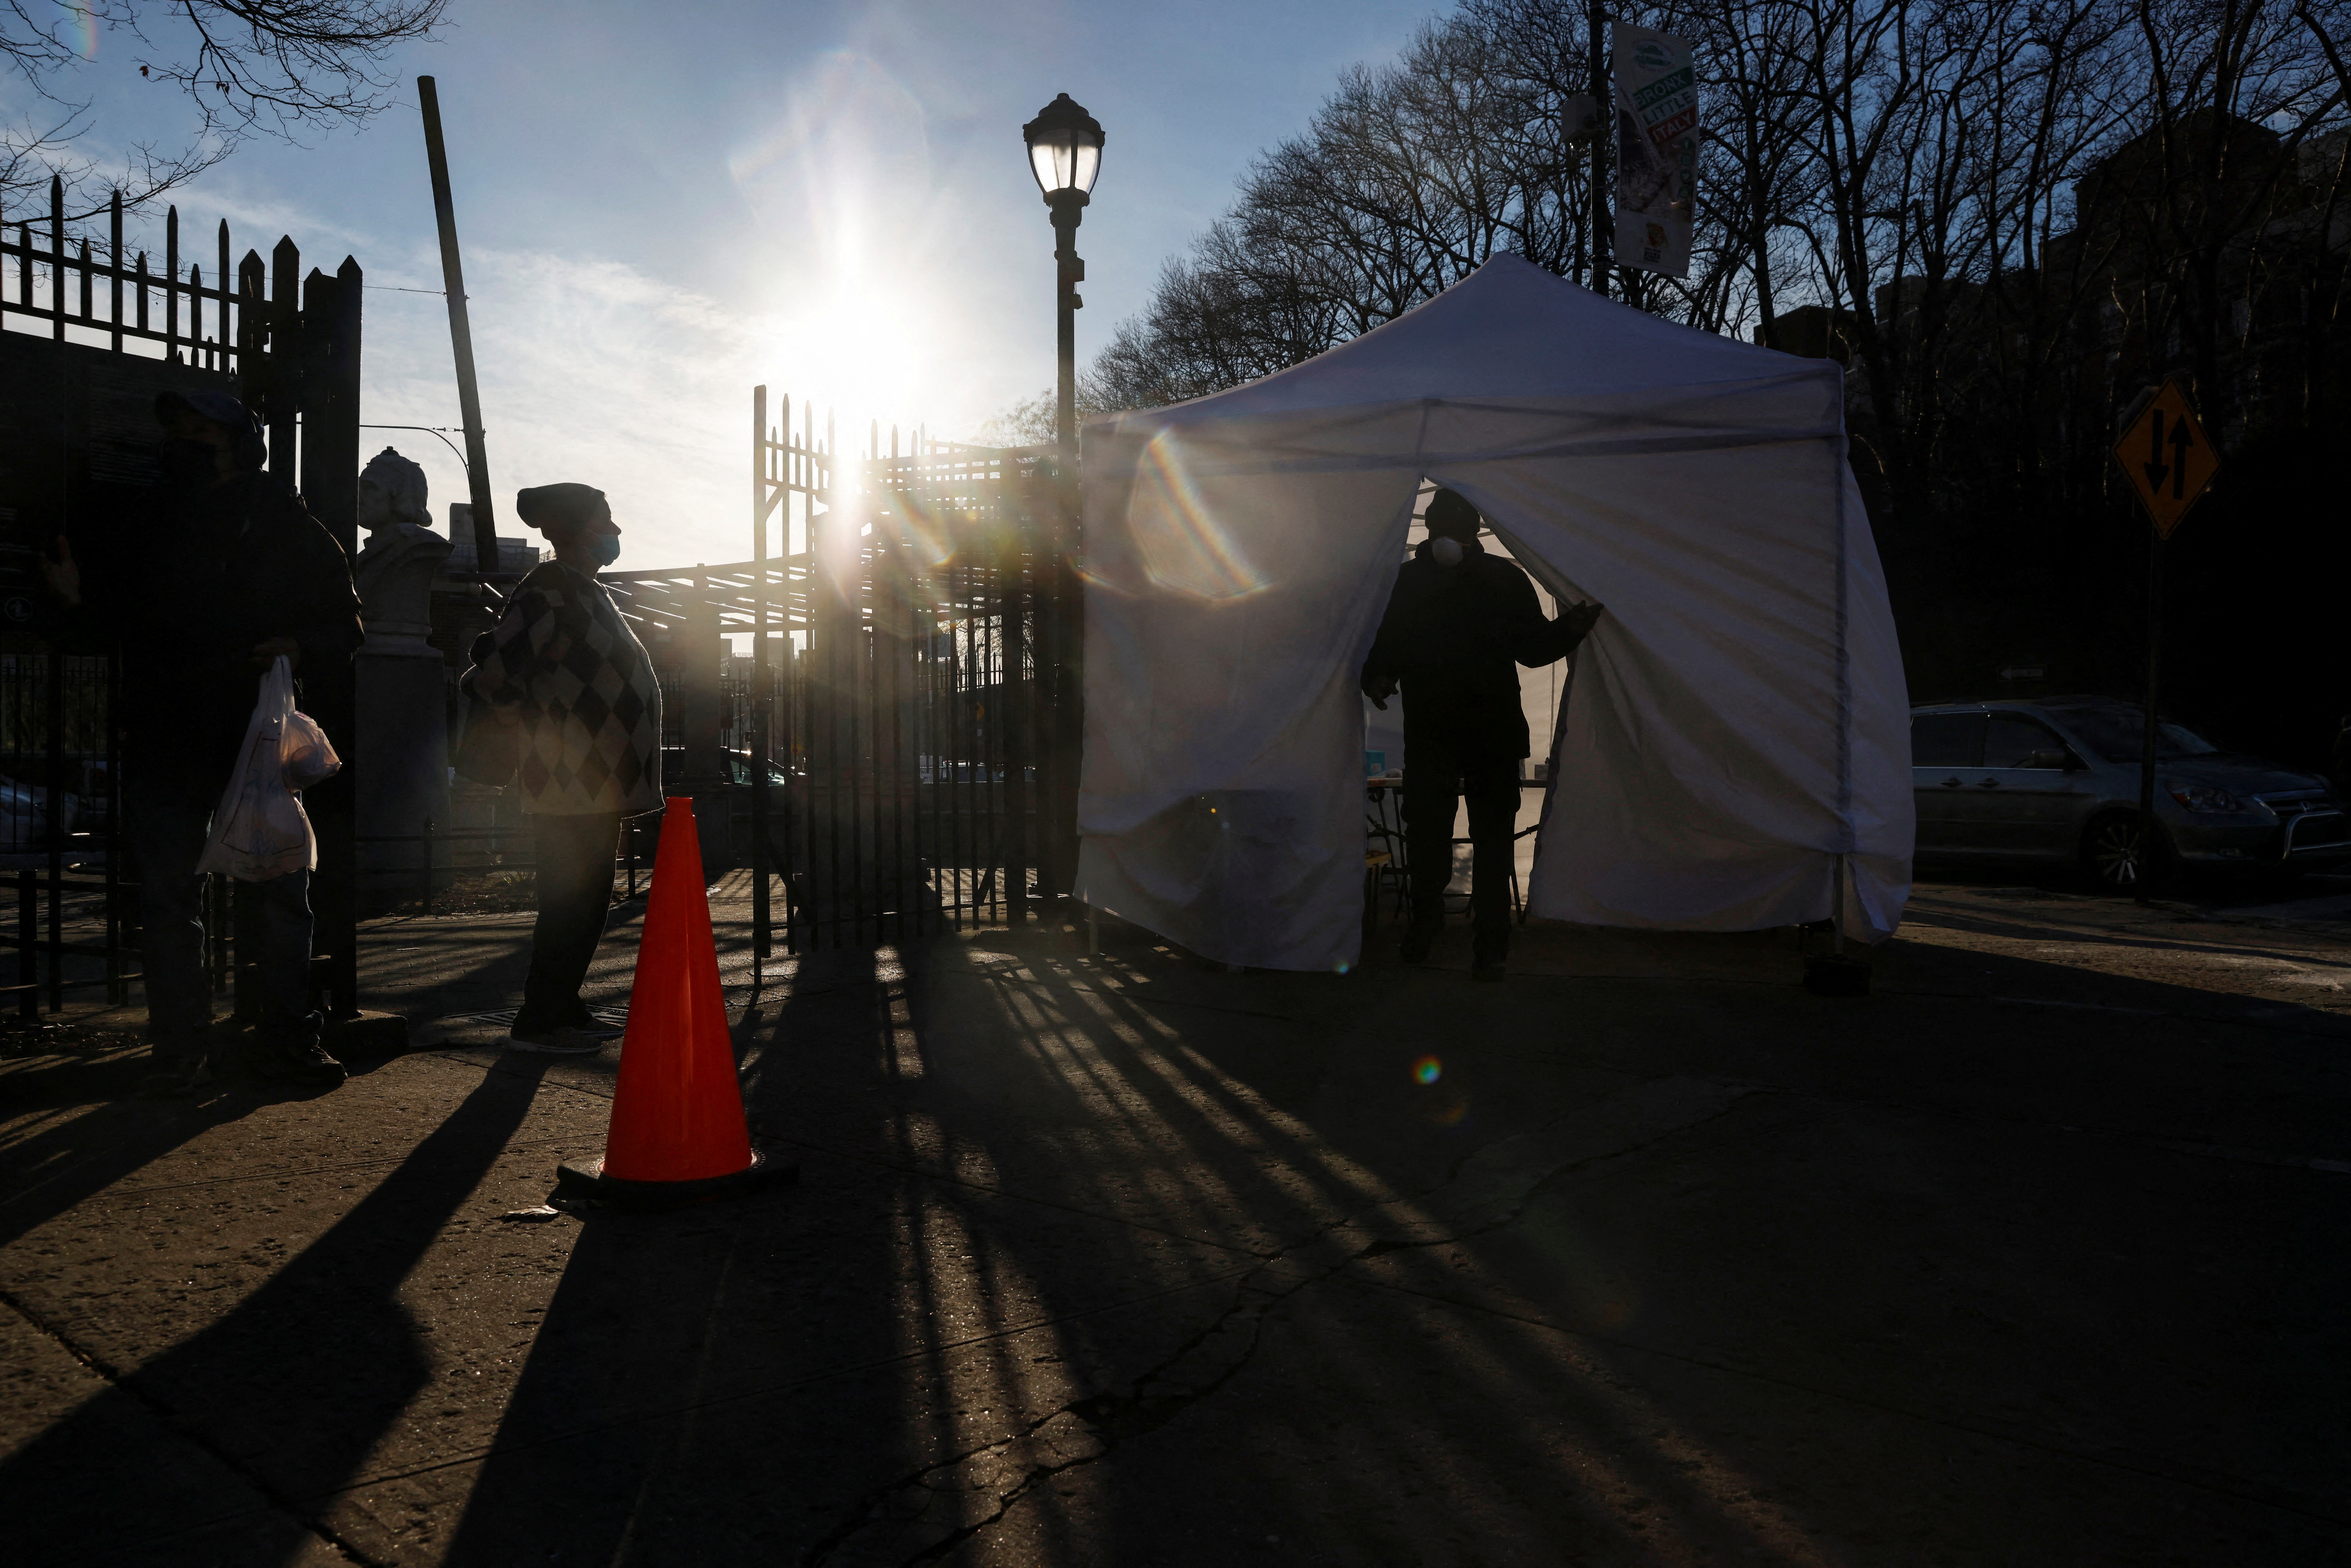 People wait in line to a coronavirus disease (COVID-19) pop-up testing site as a man leaves, in the Bronx borough of New York City, New York, U.S., January 12, 2022. REUTERS/Shannon Stapleton